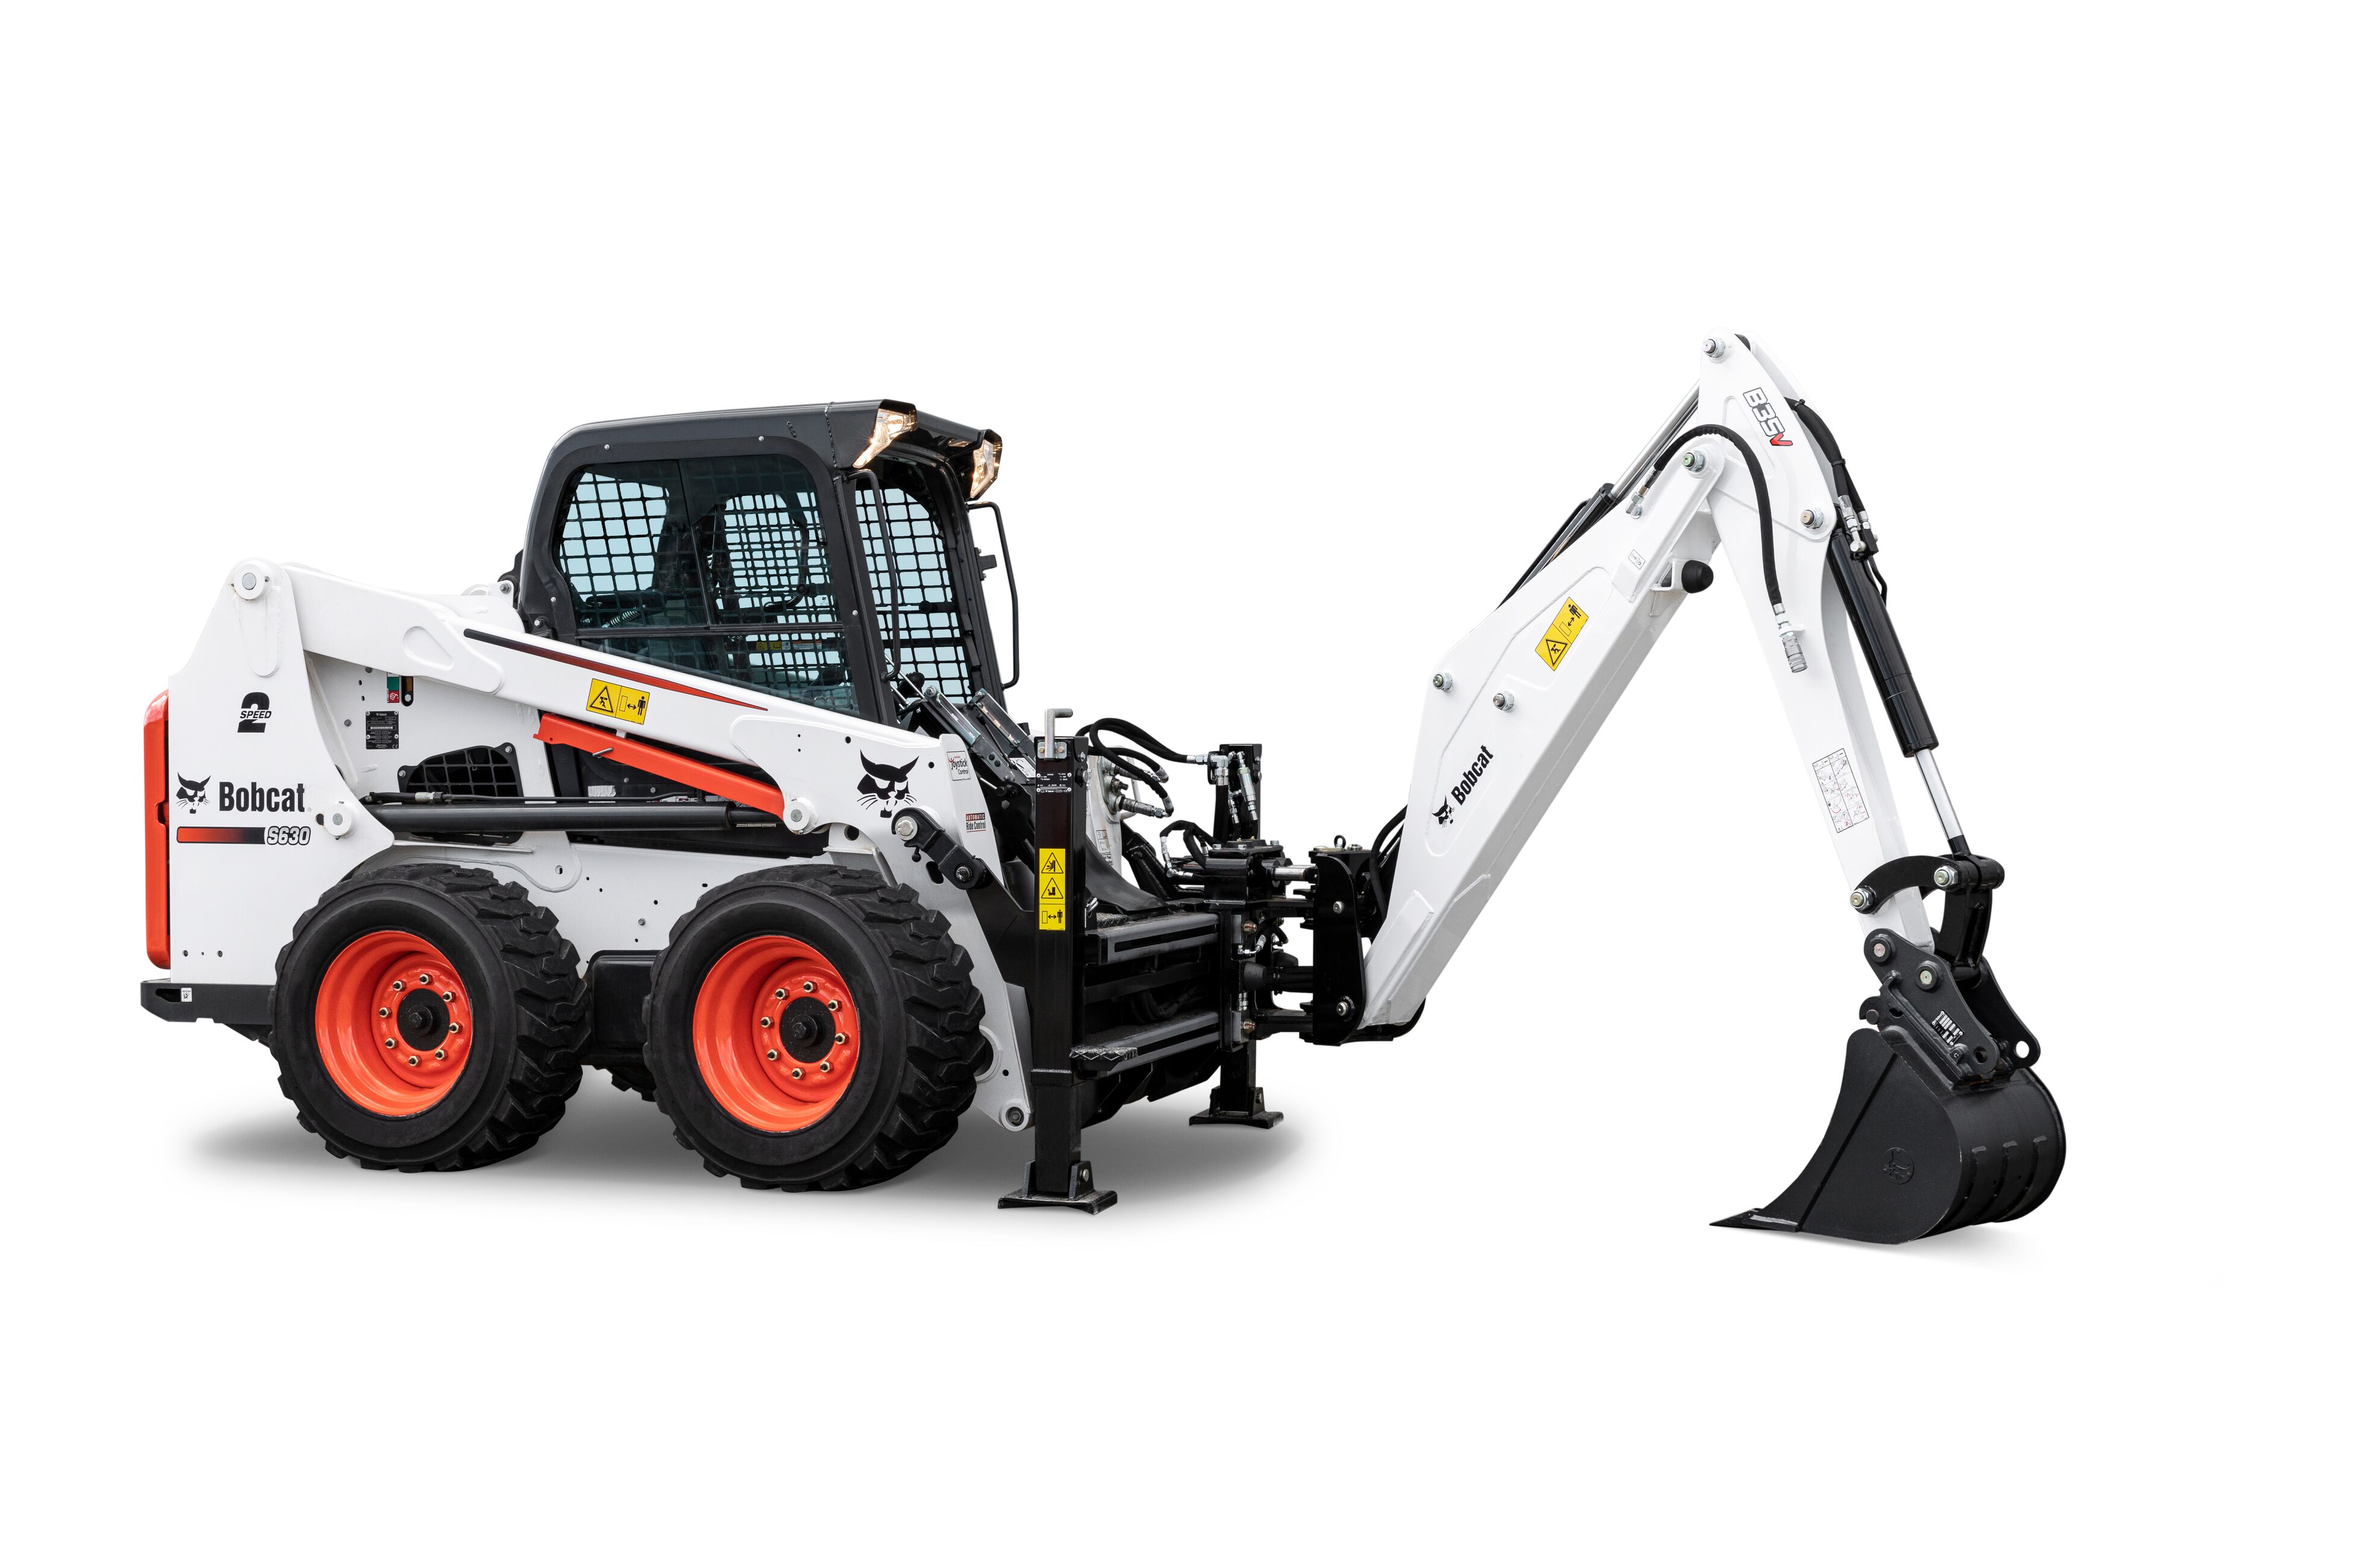 Bobcat has developed a new type of backhoe attachment for its